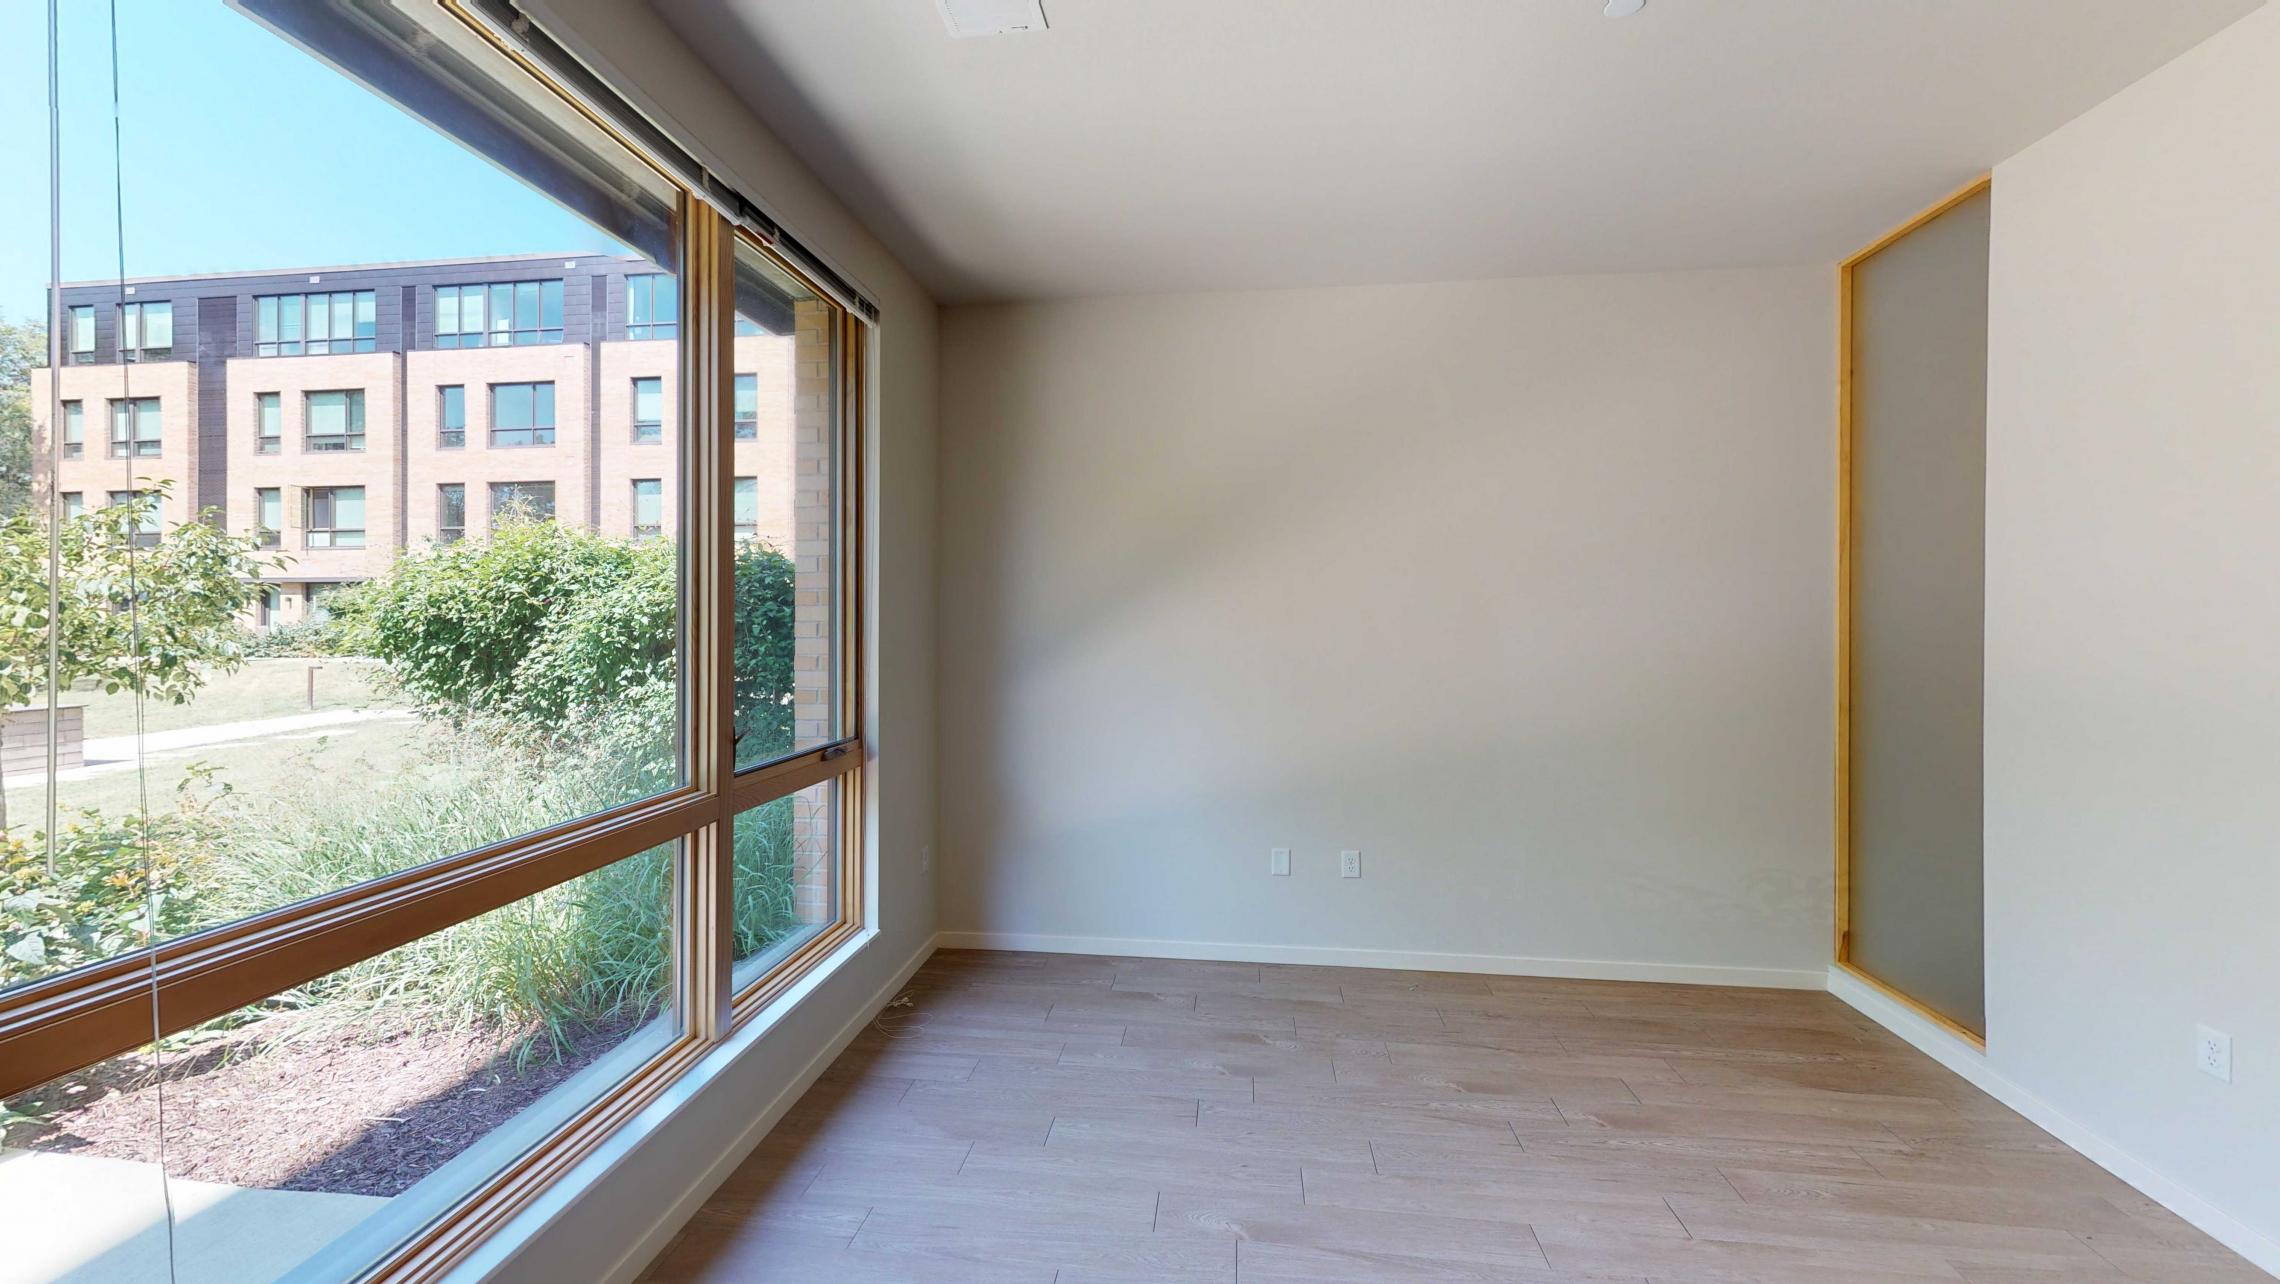 Quarter-Row-Yards-Apartment-106-One-Bedroom-Patio-Modern-Upscale-Fitness-Lounge-Courtyard-Downtown-Madison-View-Bike-Trail-Lifestyle-Lake-Monona